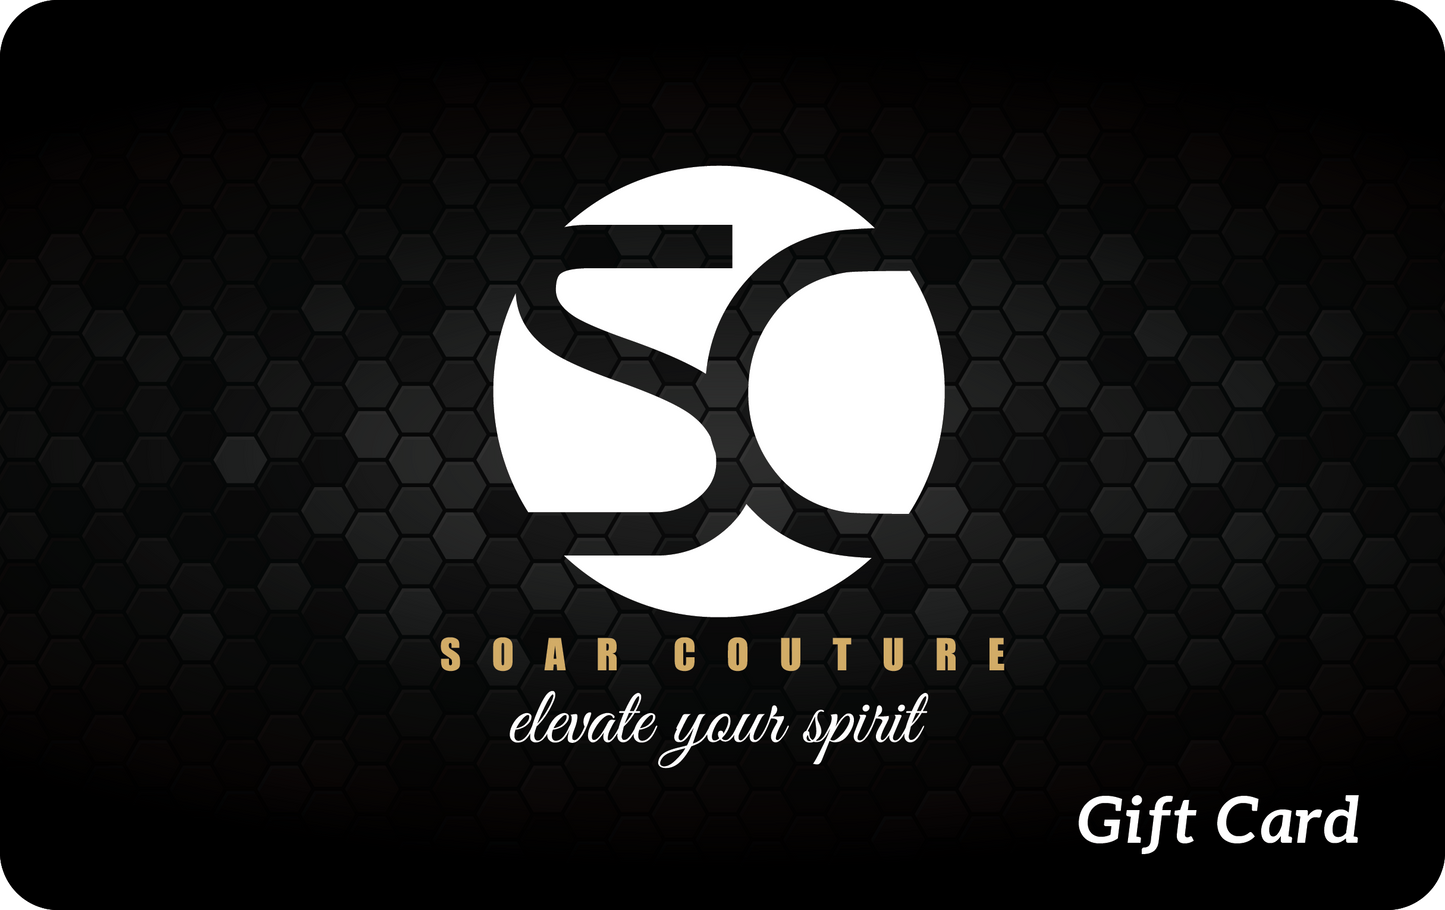 Gift Card 3 - SoarCouture